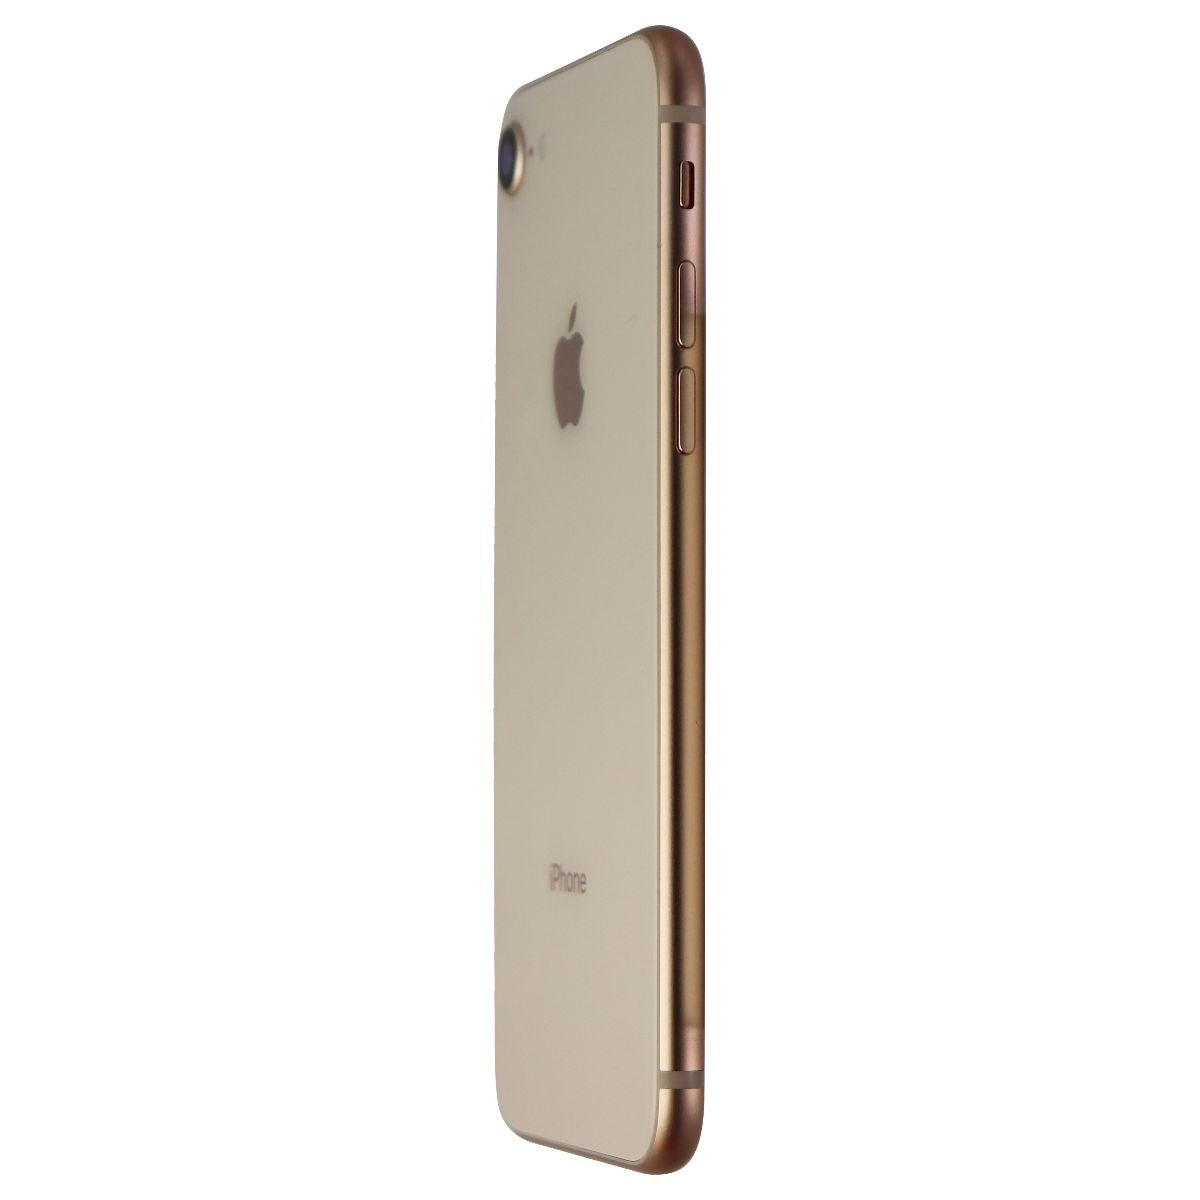 Apple iPhone 8 (4.7-inch) Smartphone (A1863) GSM + CDMA - 128GB / Gold Cell Phones & Smartphones Apple    - Simple Cell Bulk Wholesale Pricing - USA Seller